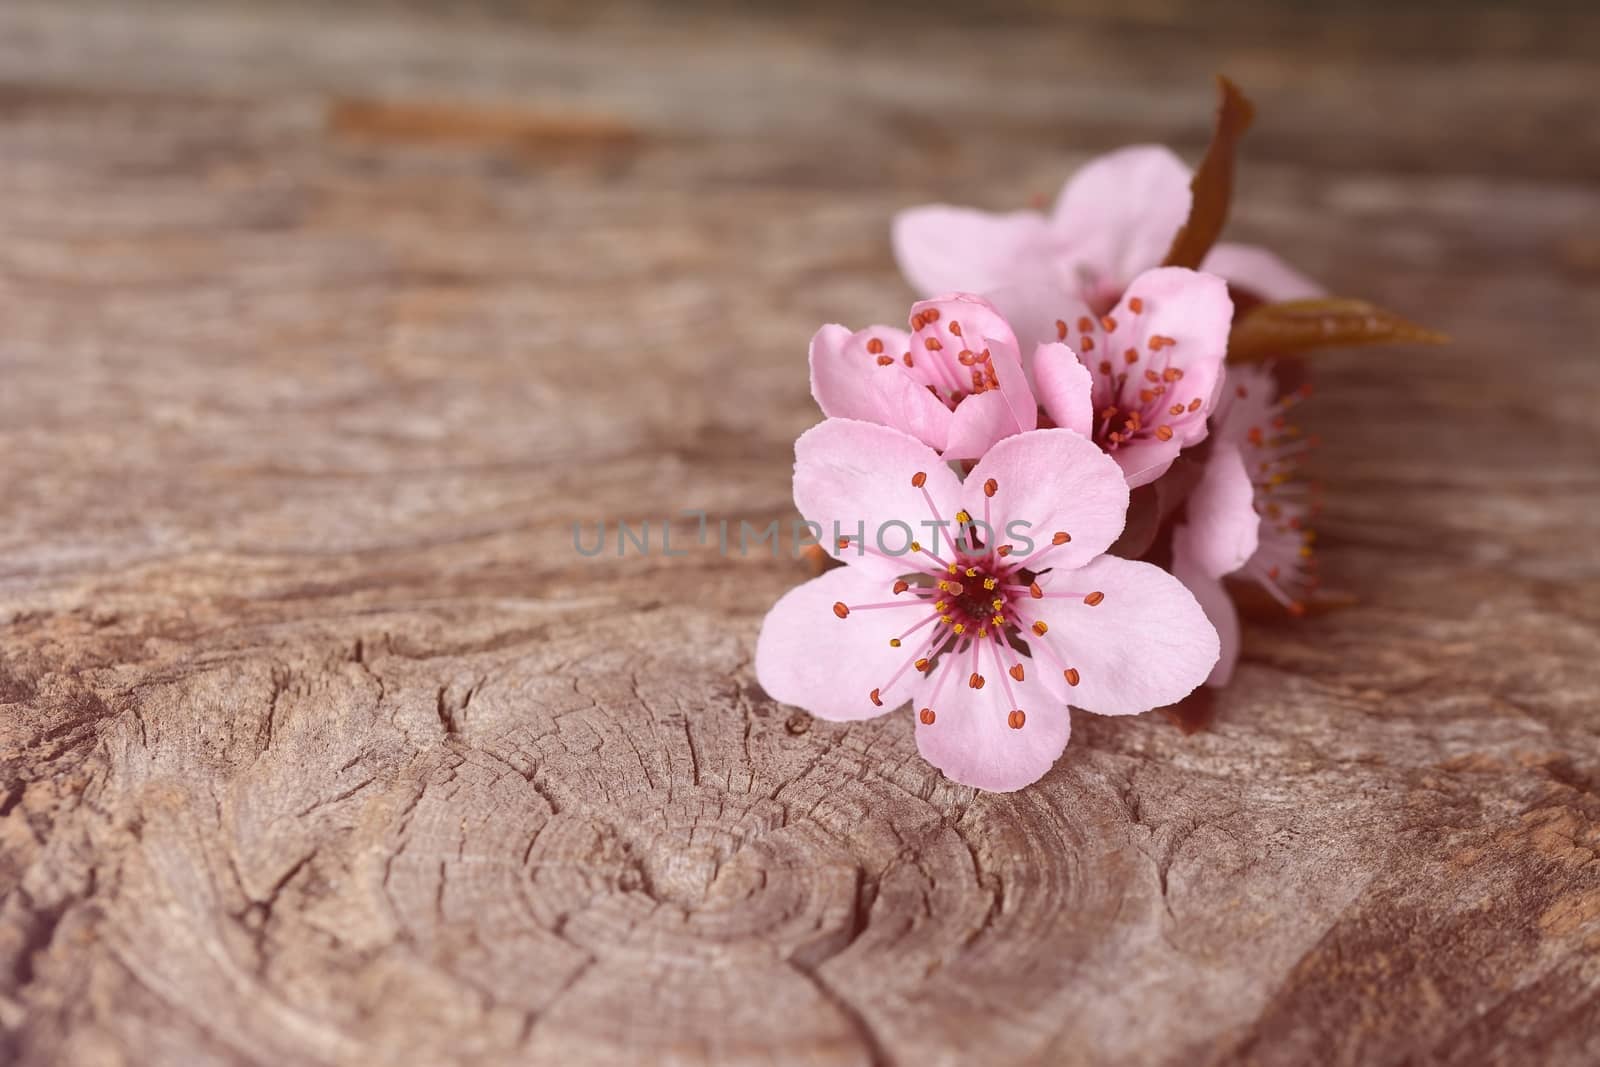 Spring blossom on rustic wooden plank by comet